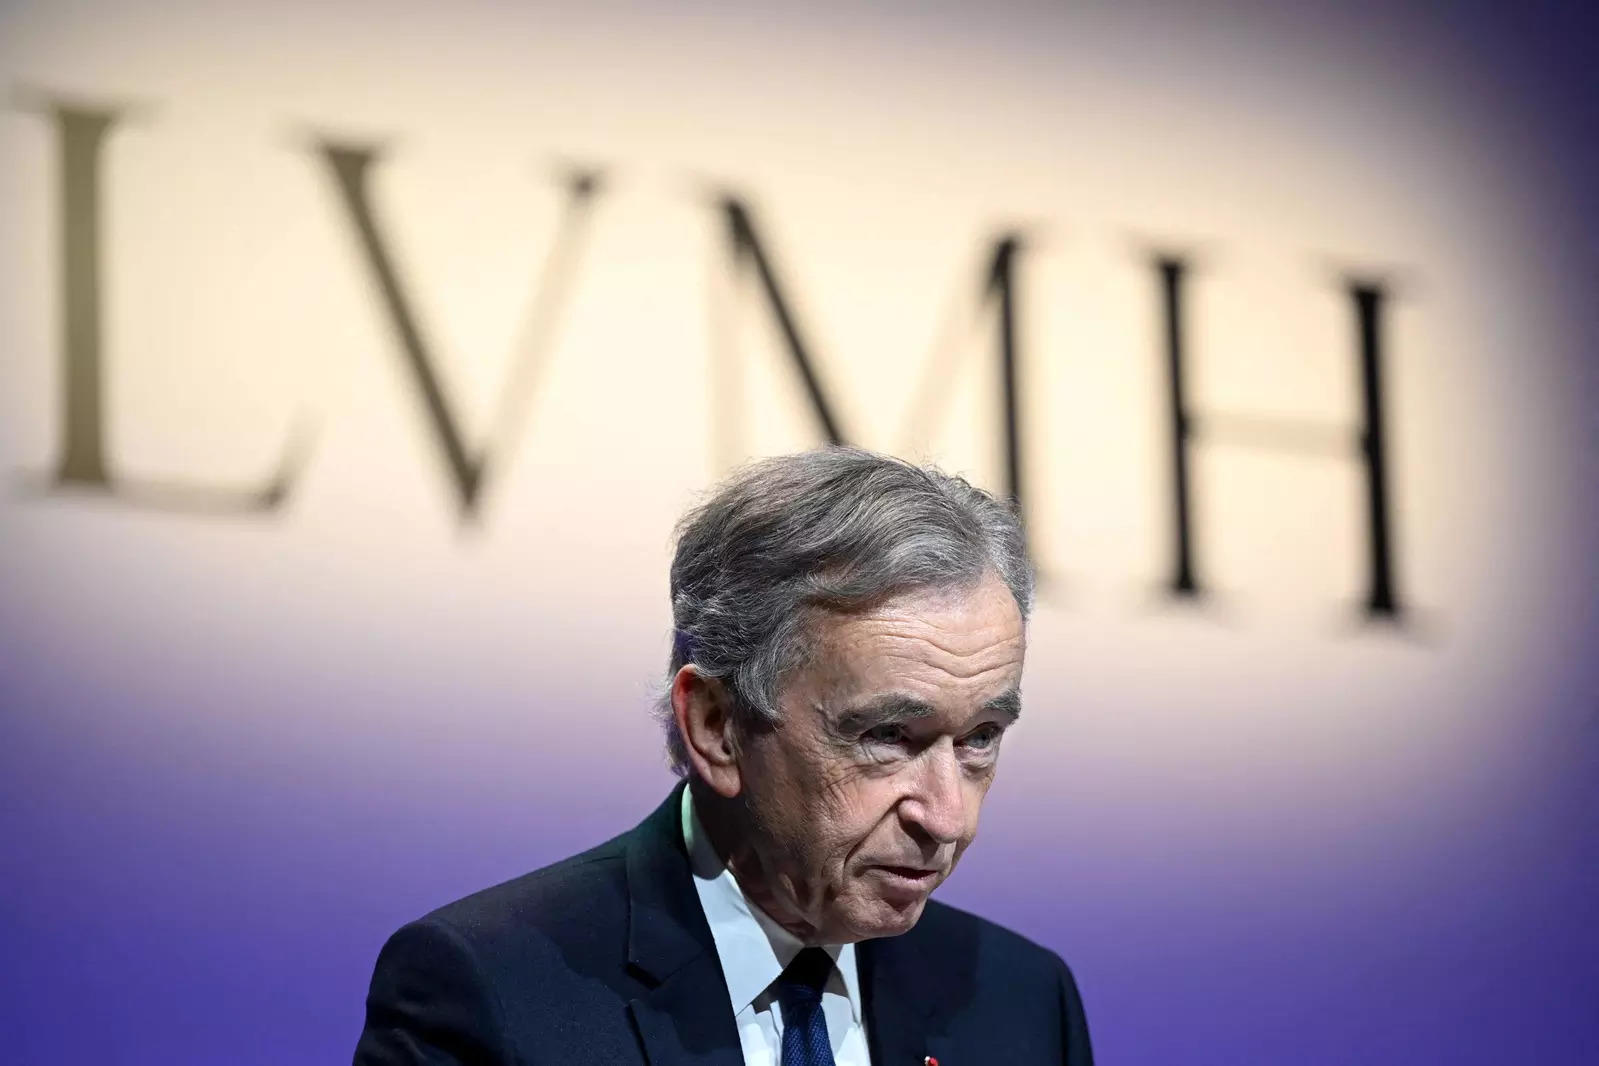 LVMH (LVMHF): Even More Appealing Following The Decline